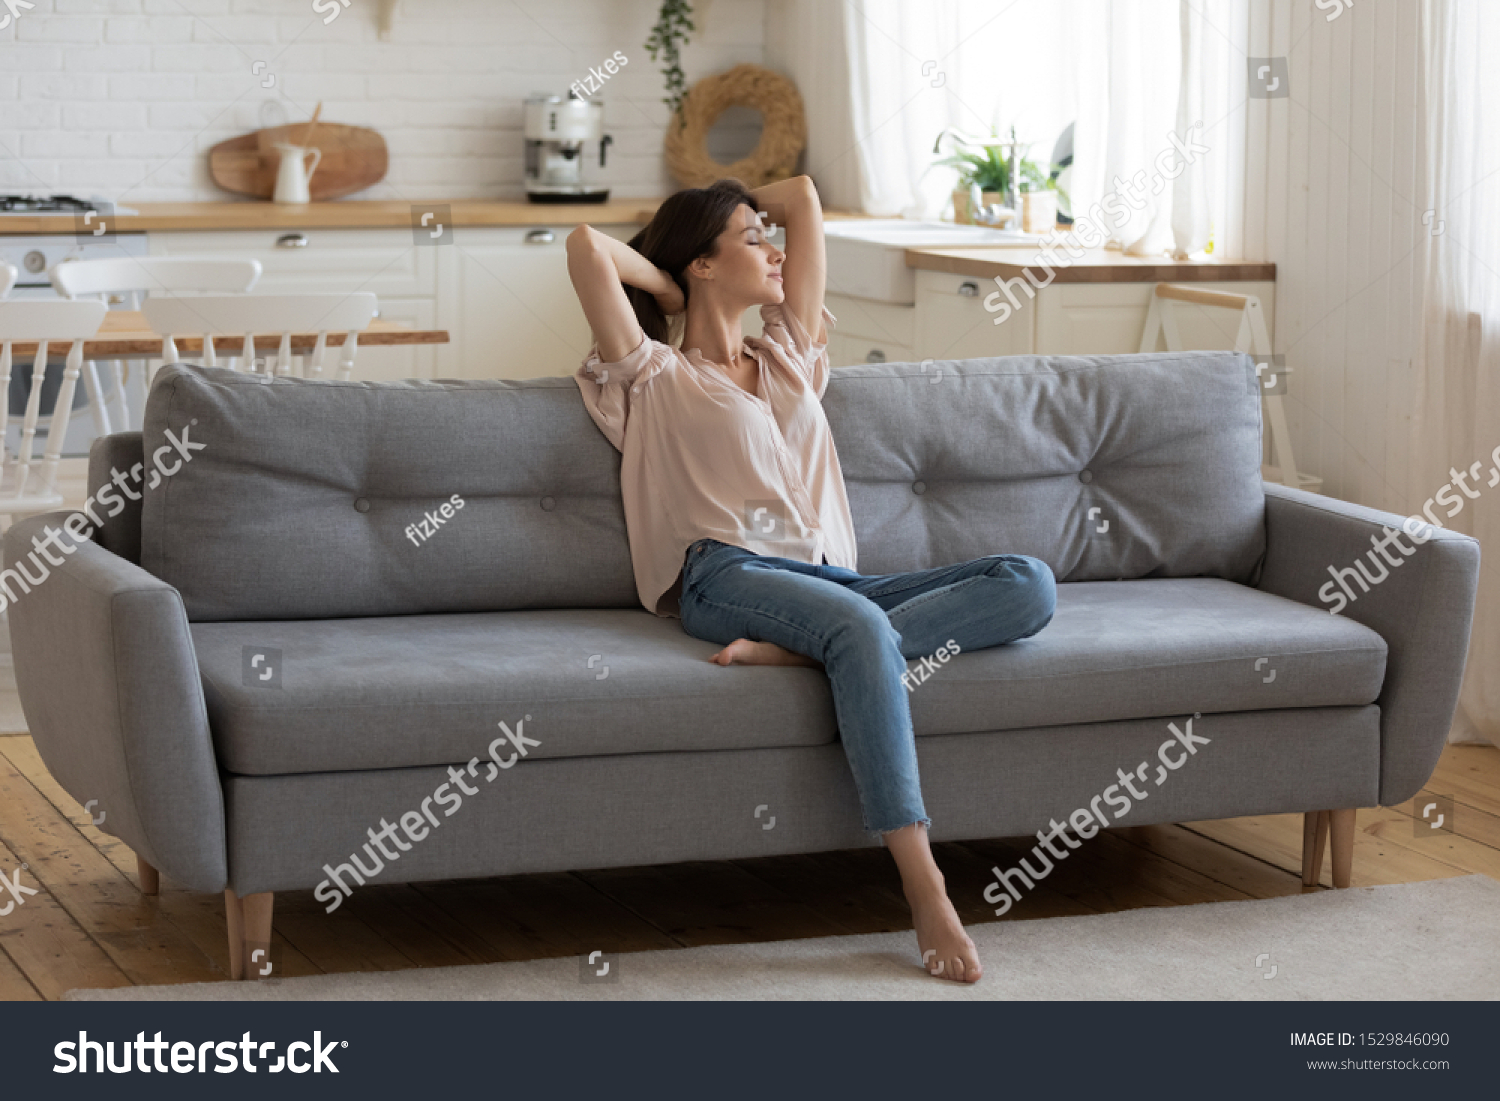 Calm serene young woman relaxing on comfortable couch at home with closed eyes and hands behind head, satisfied girl stretching on sofa, daydreaming and meditating in cozy living room #1529846090